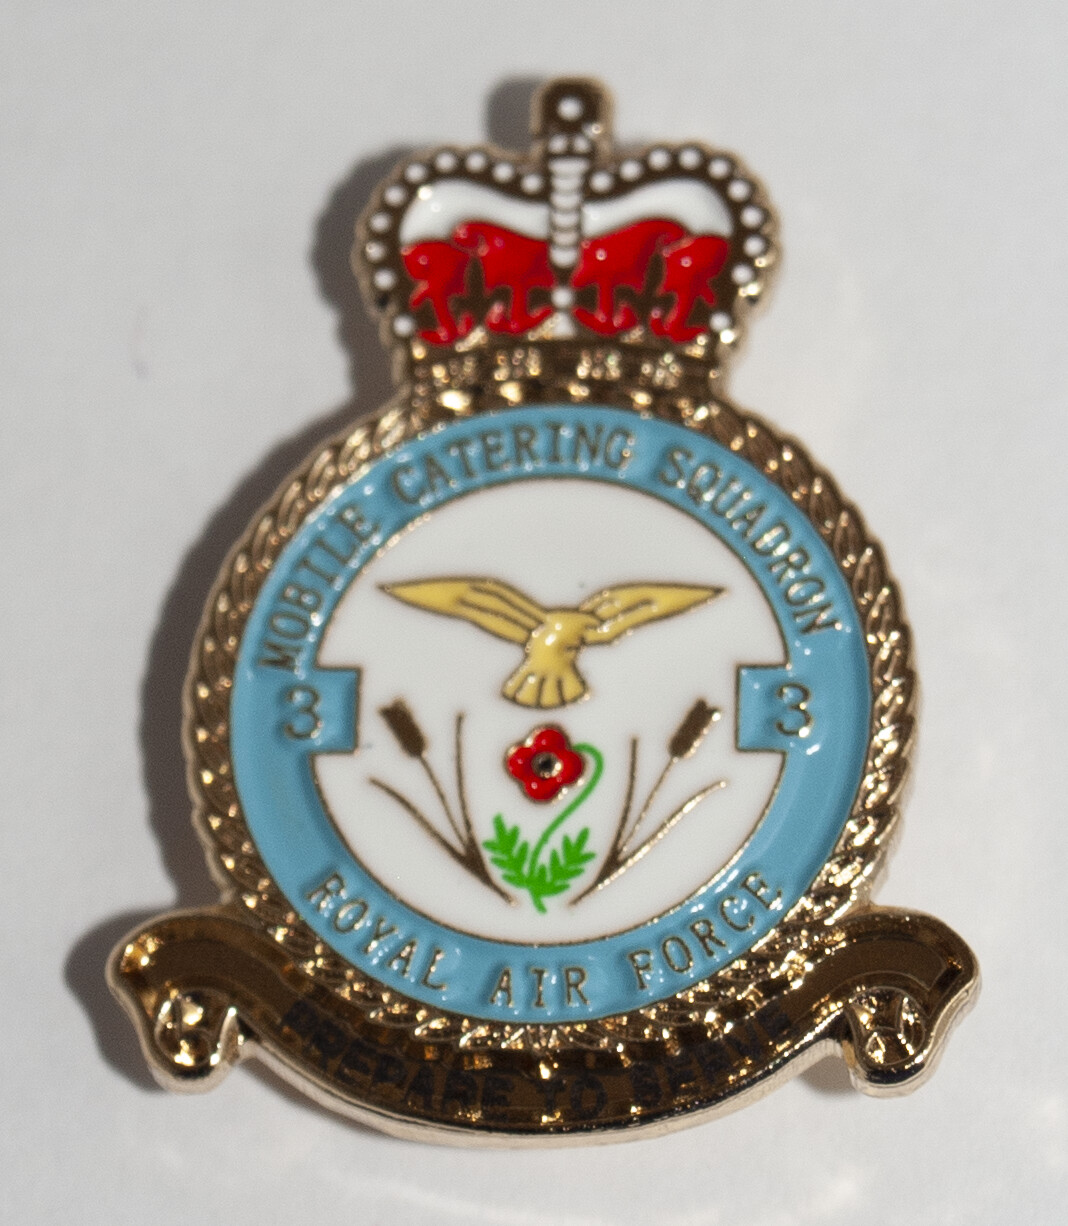 Brand New Beautiful Military Enamel Pin Badge Veteran and Serving Royal Air Force 3 Sqn Mobile Catering Squadron Lapel pin Remembrance Day